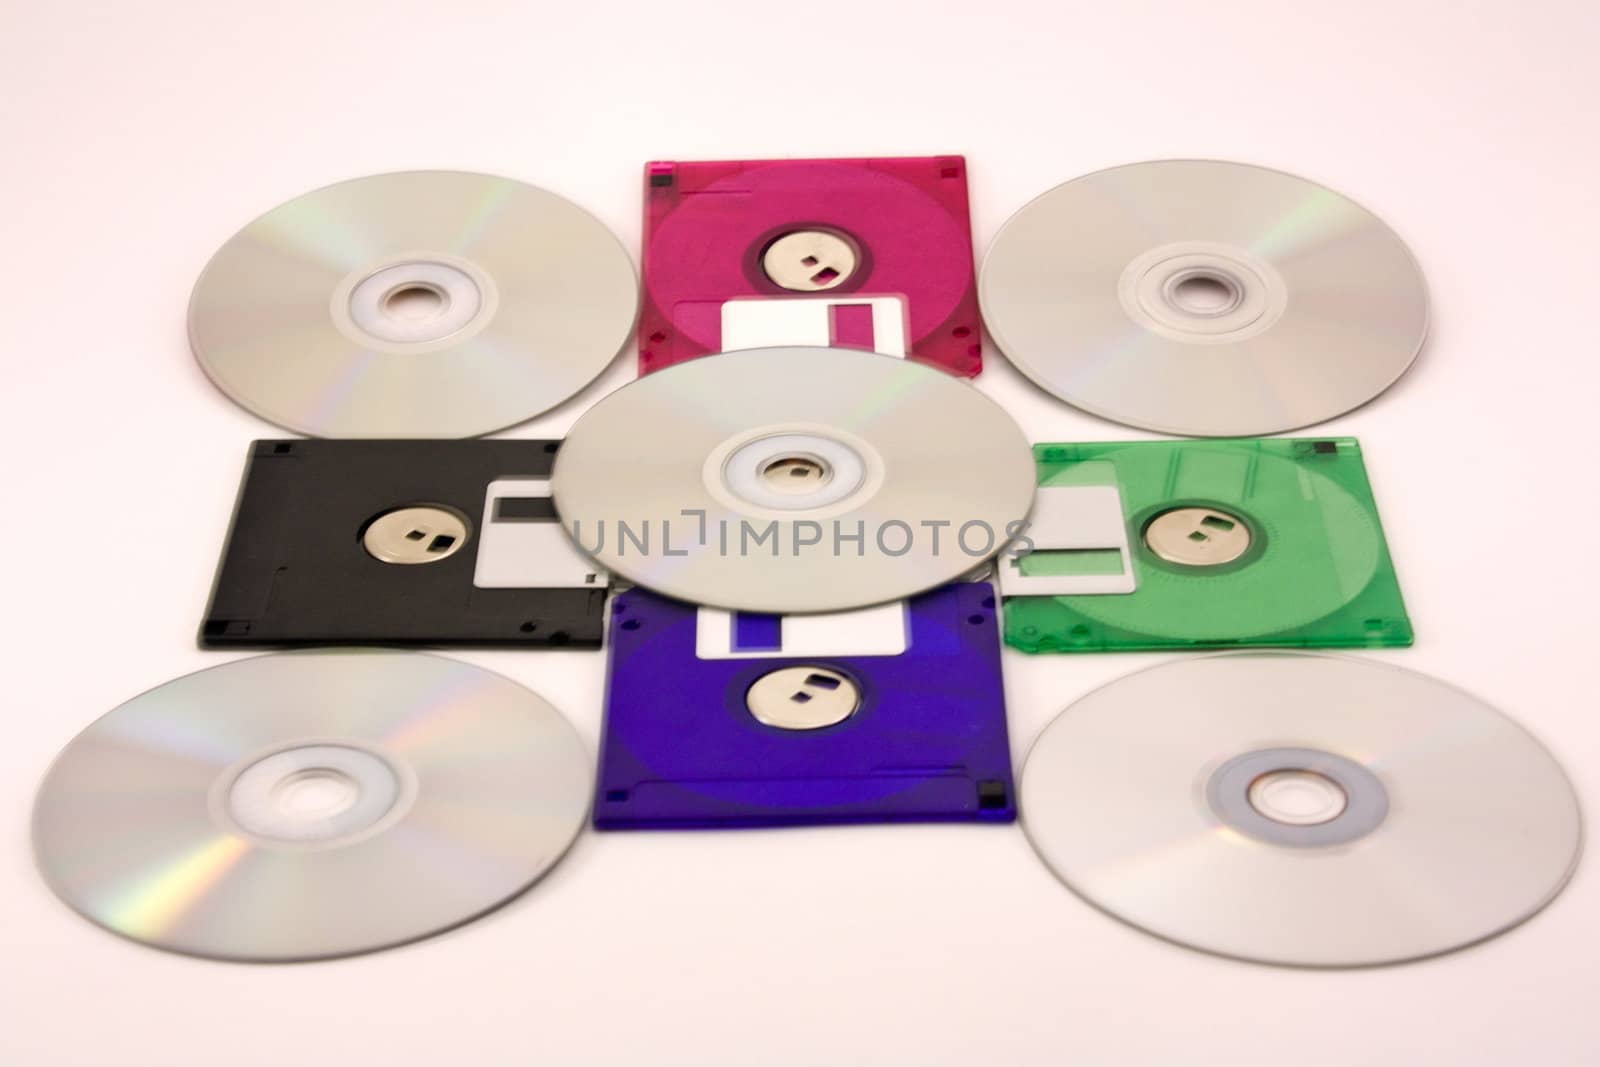  Floppy disks and cd  by Baltus